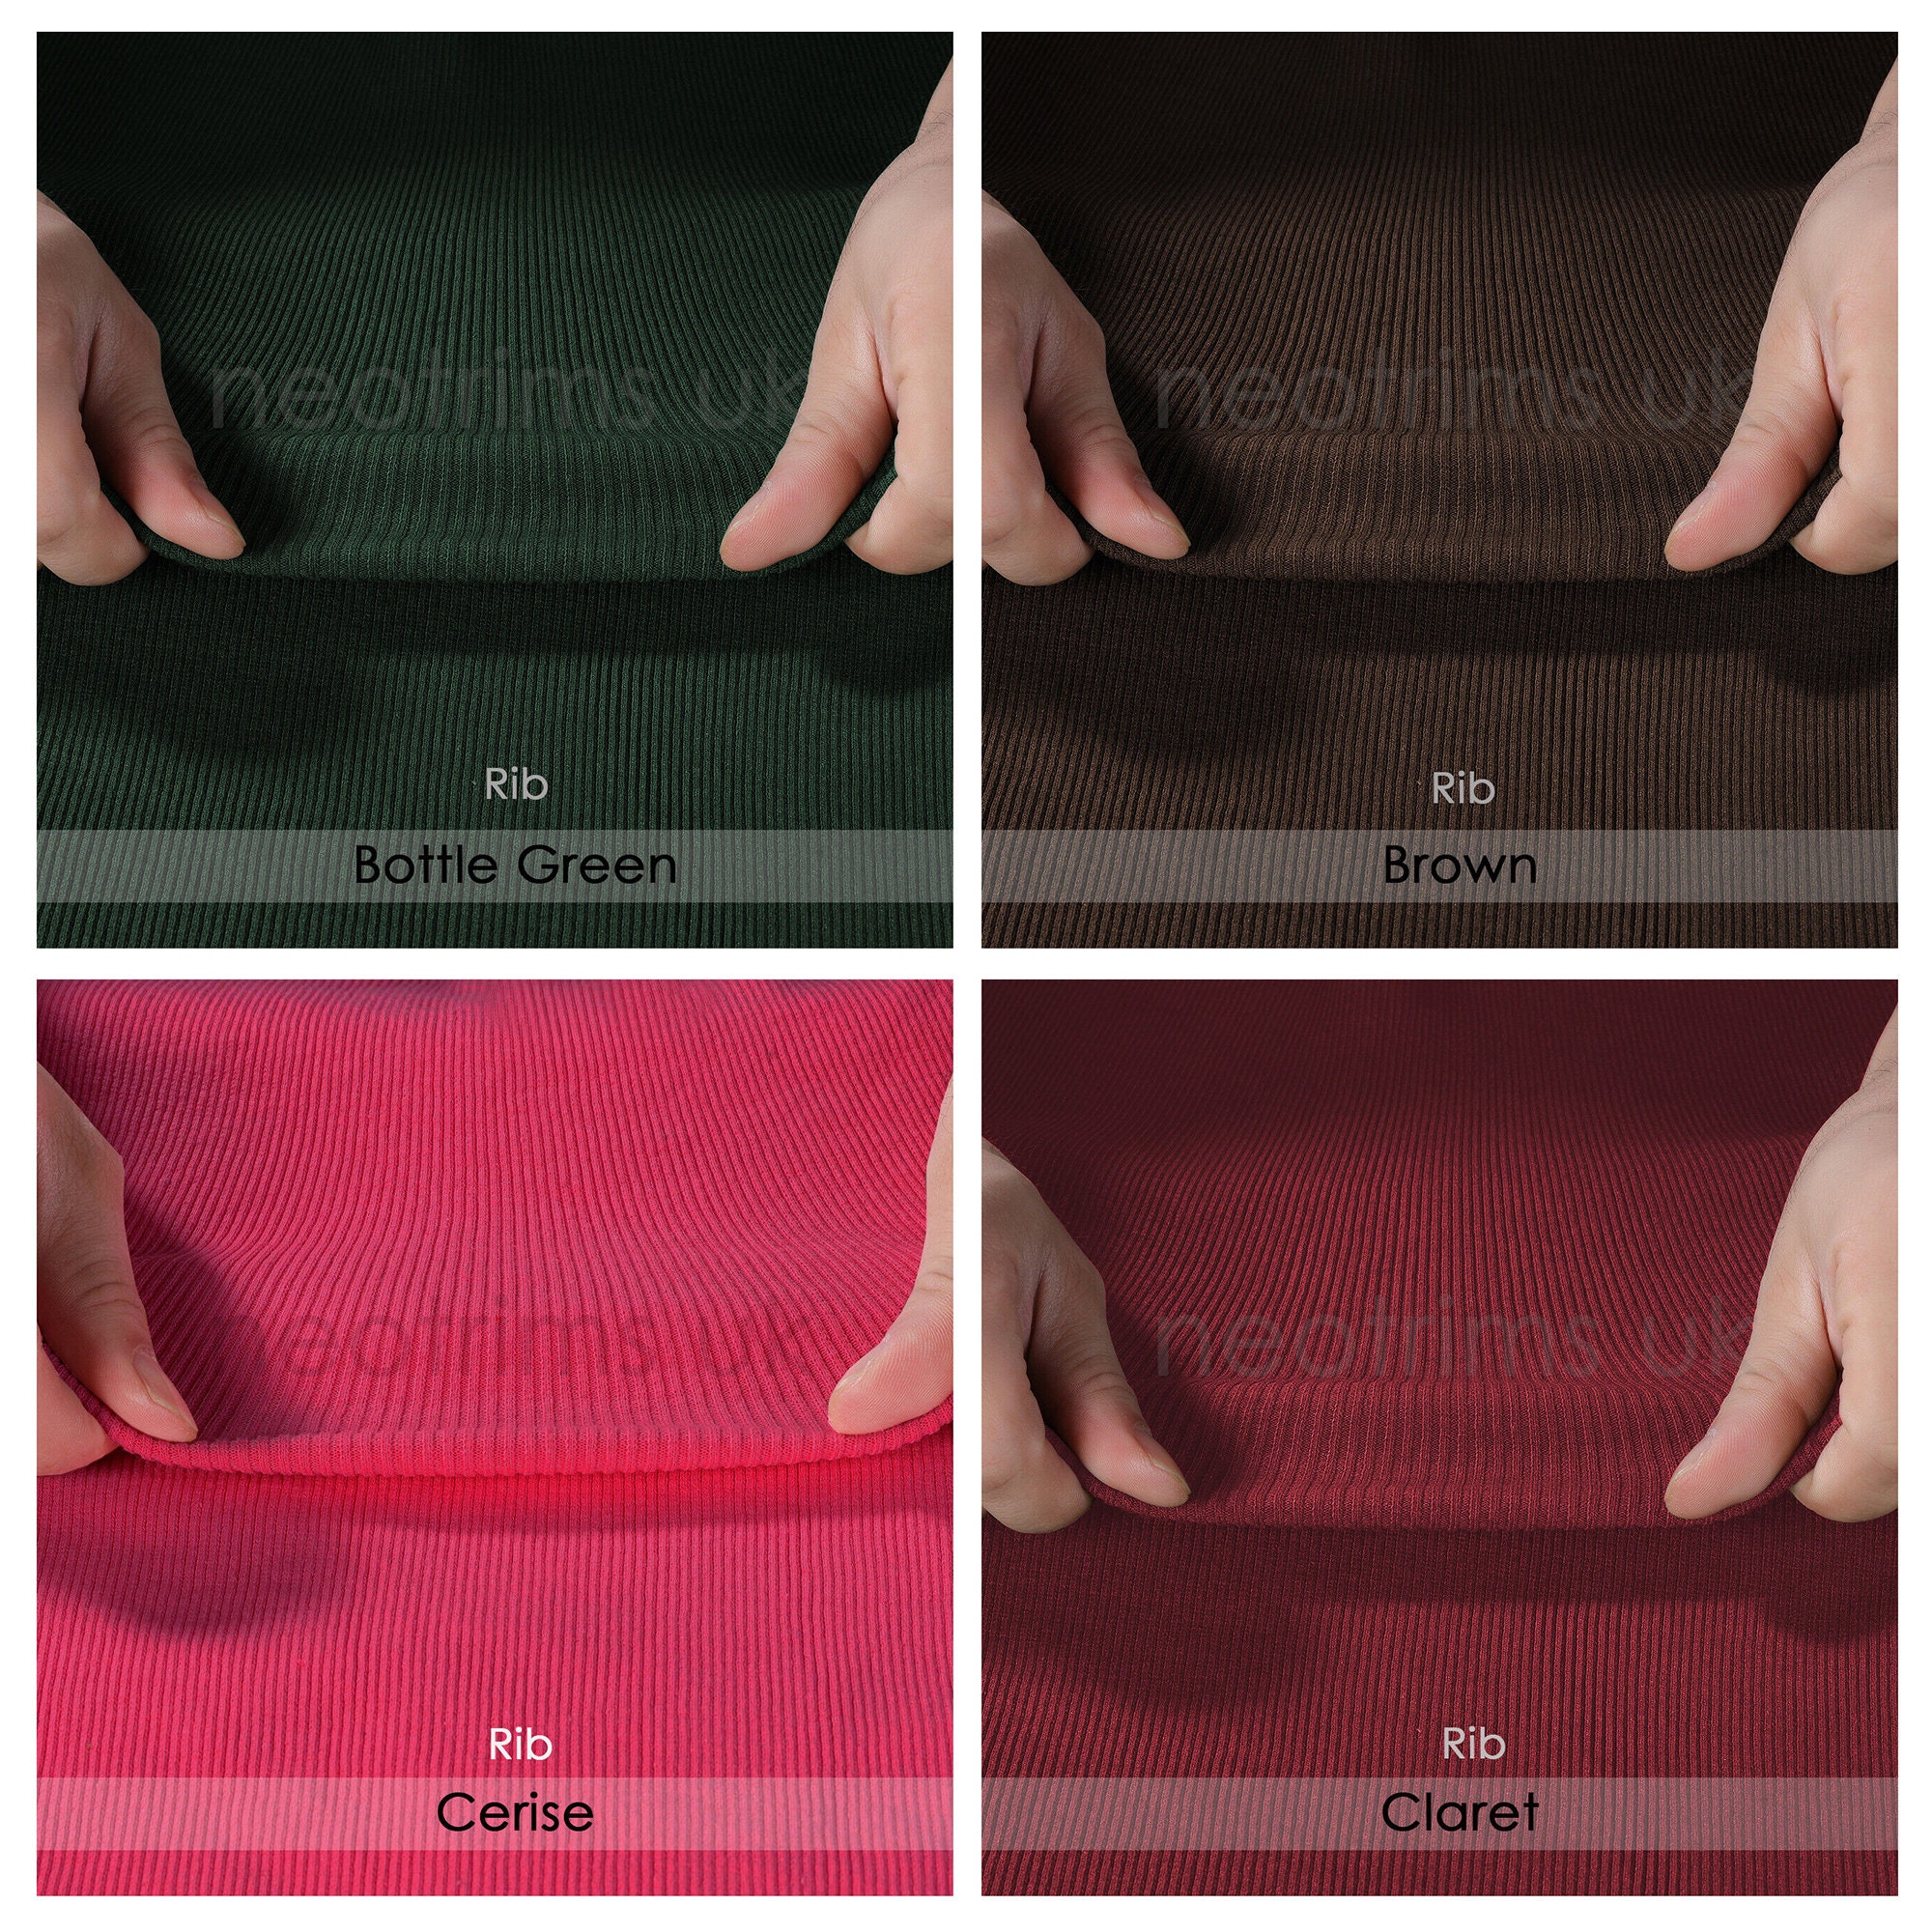 Ribbing Fabric Archives - Neotrims